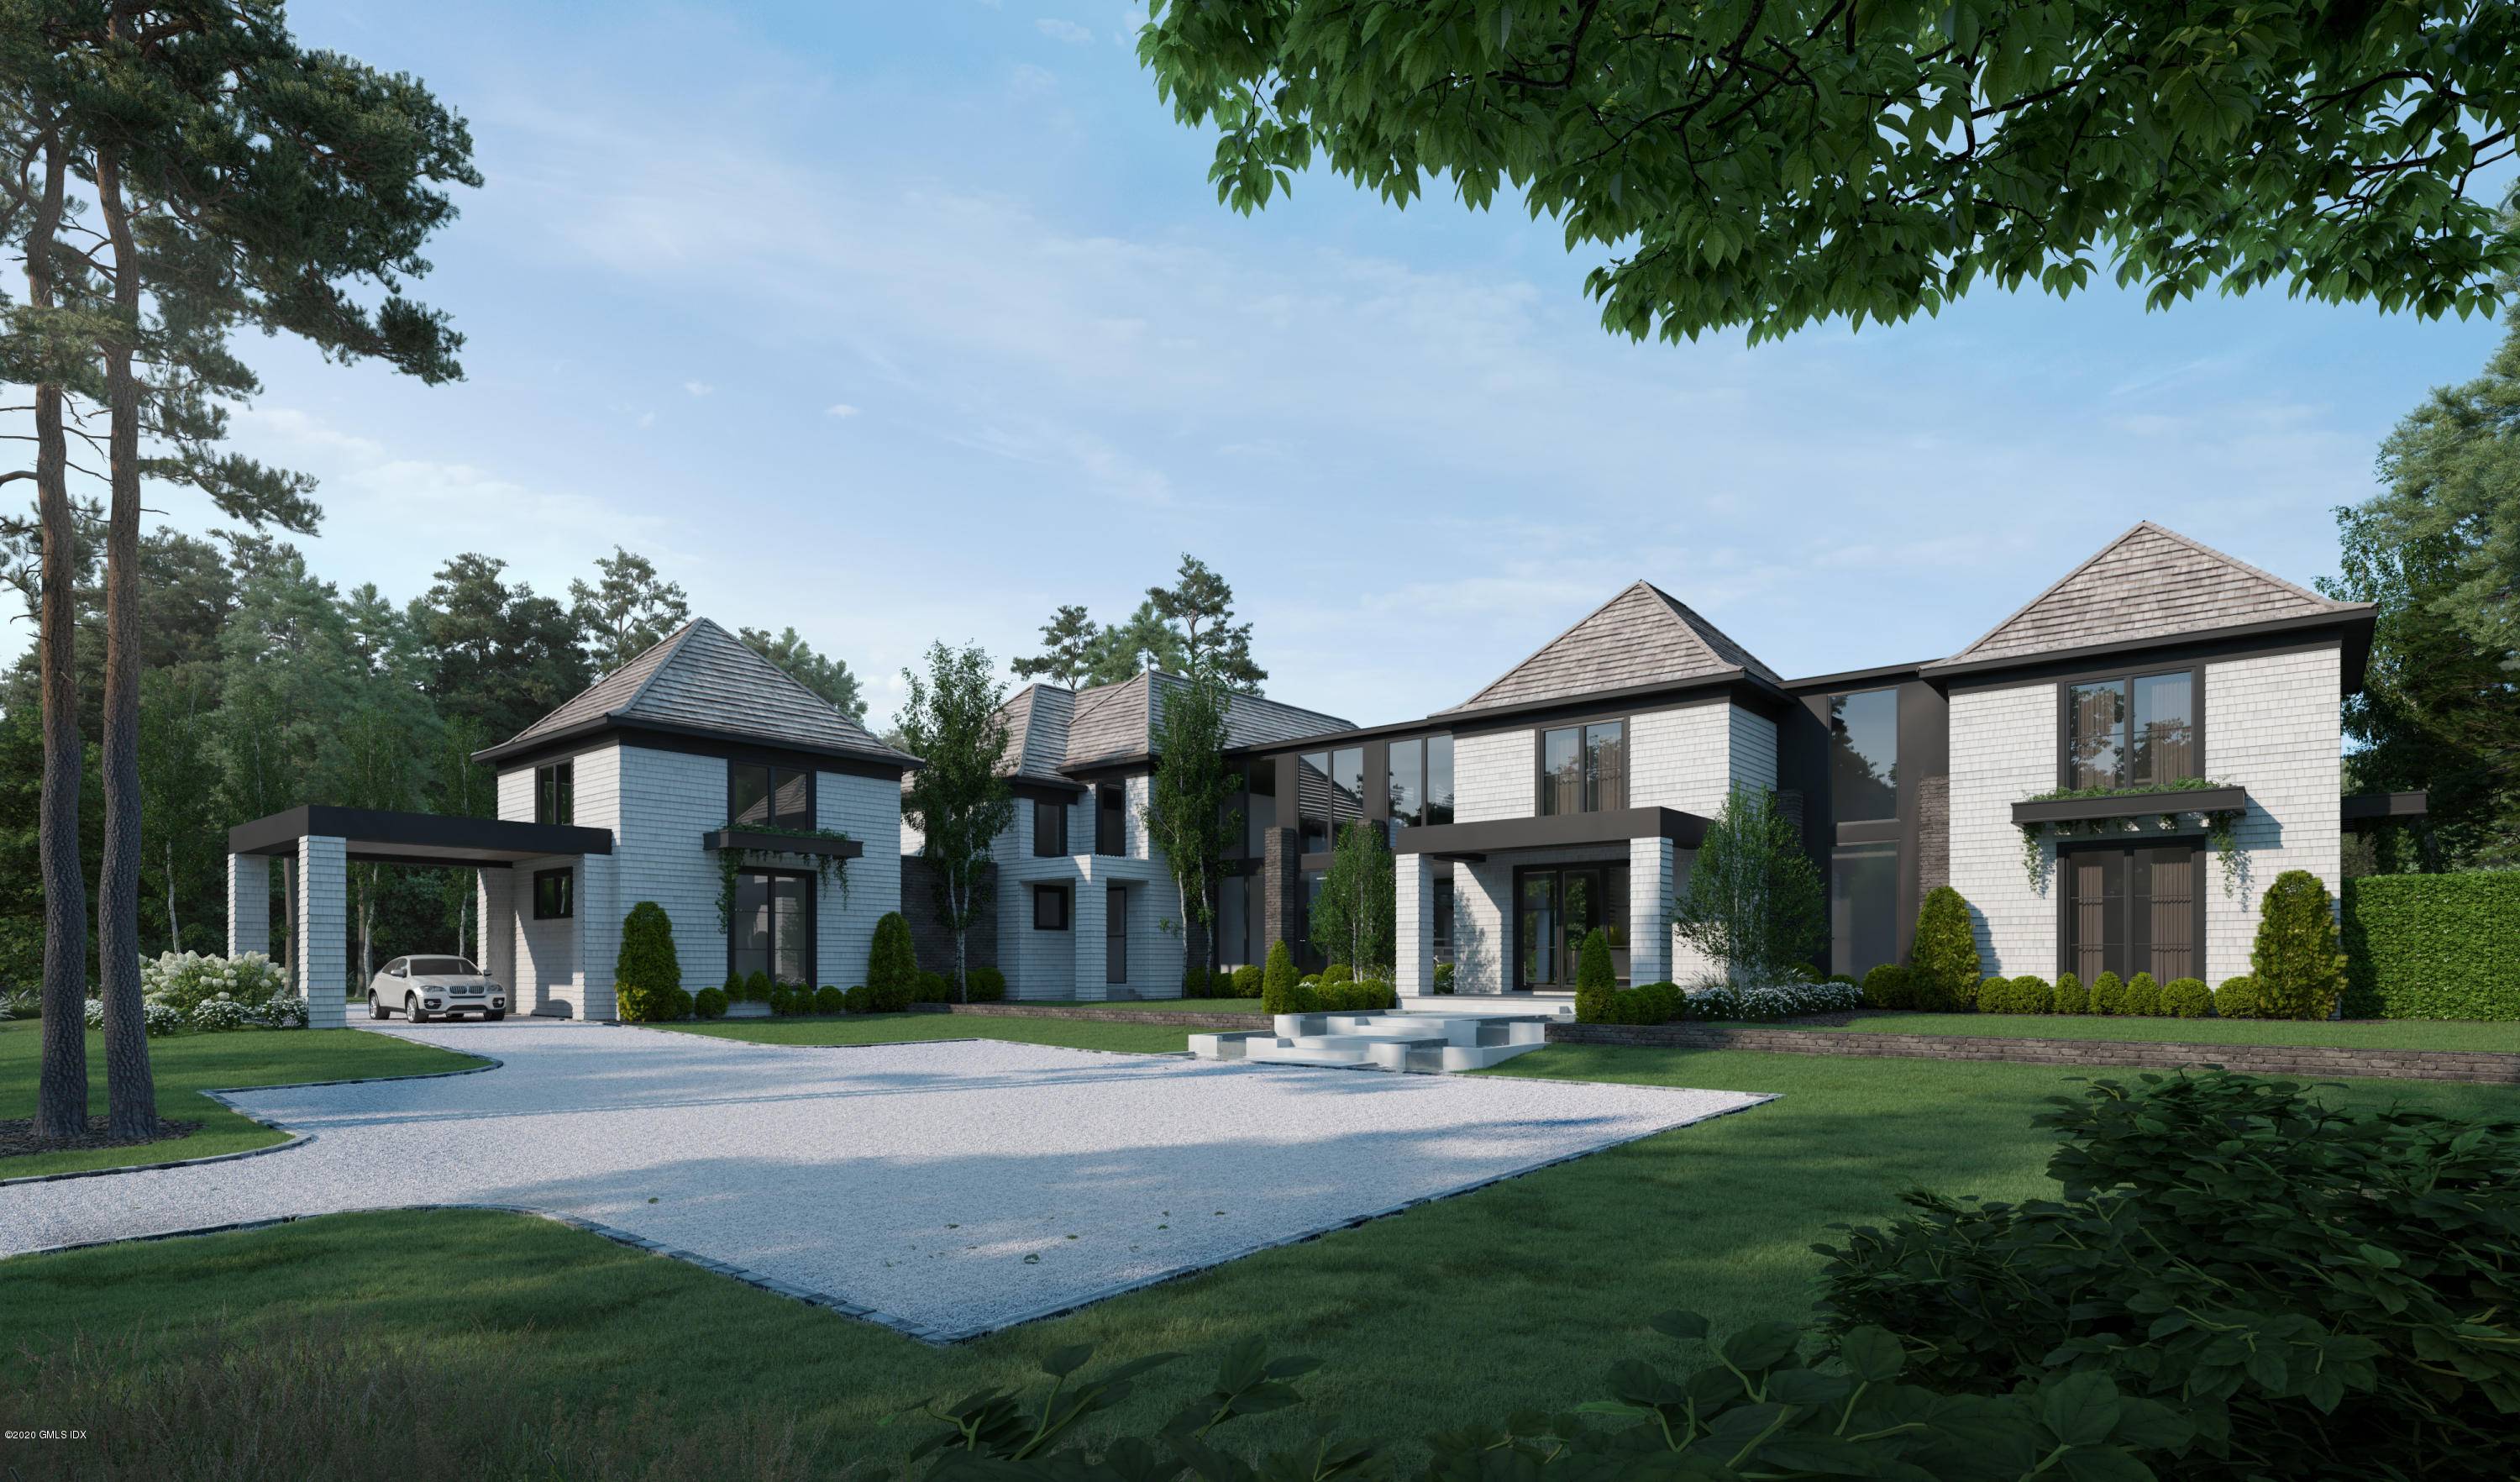 SBP Homes' upcoming creation will be a New Classical country compound ideally situated in pastoral back country Greenwich, just 35 miles from mid town Manhattan, 7 miles from Greenwich Avenue ...